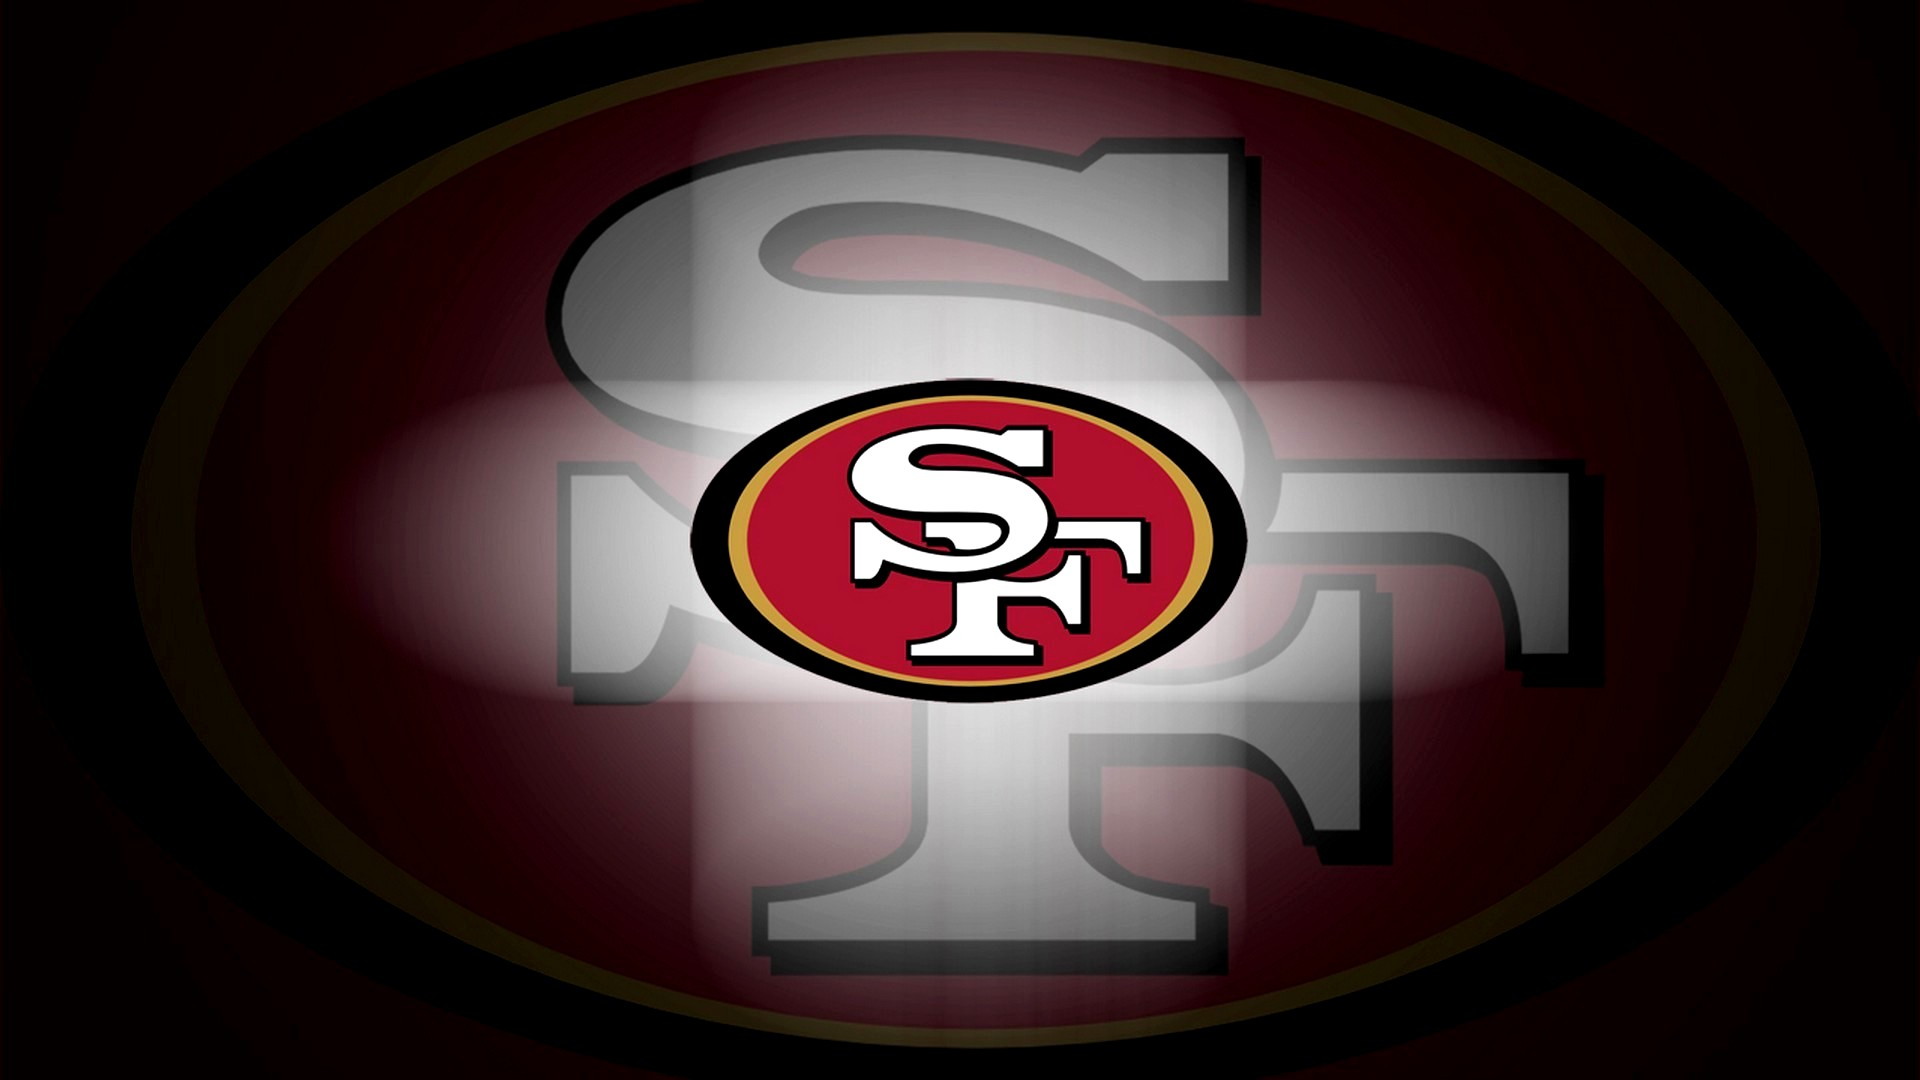 San Francisco 49ers Wallpaper For Desktop with high-resolution 1920x1080 pixel. You can use and set as wallpaper for Notebook Screensavers, Mac Wallpapers, Mobile Home Screen, iPhone or Android Phones Lock Screen